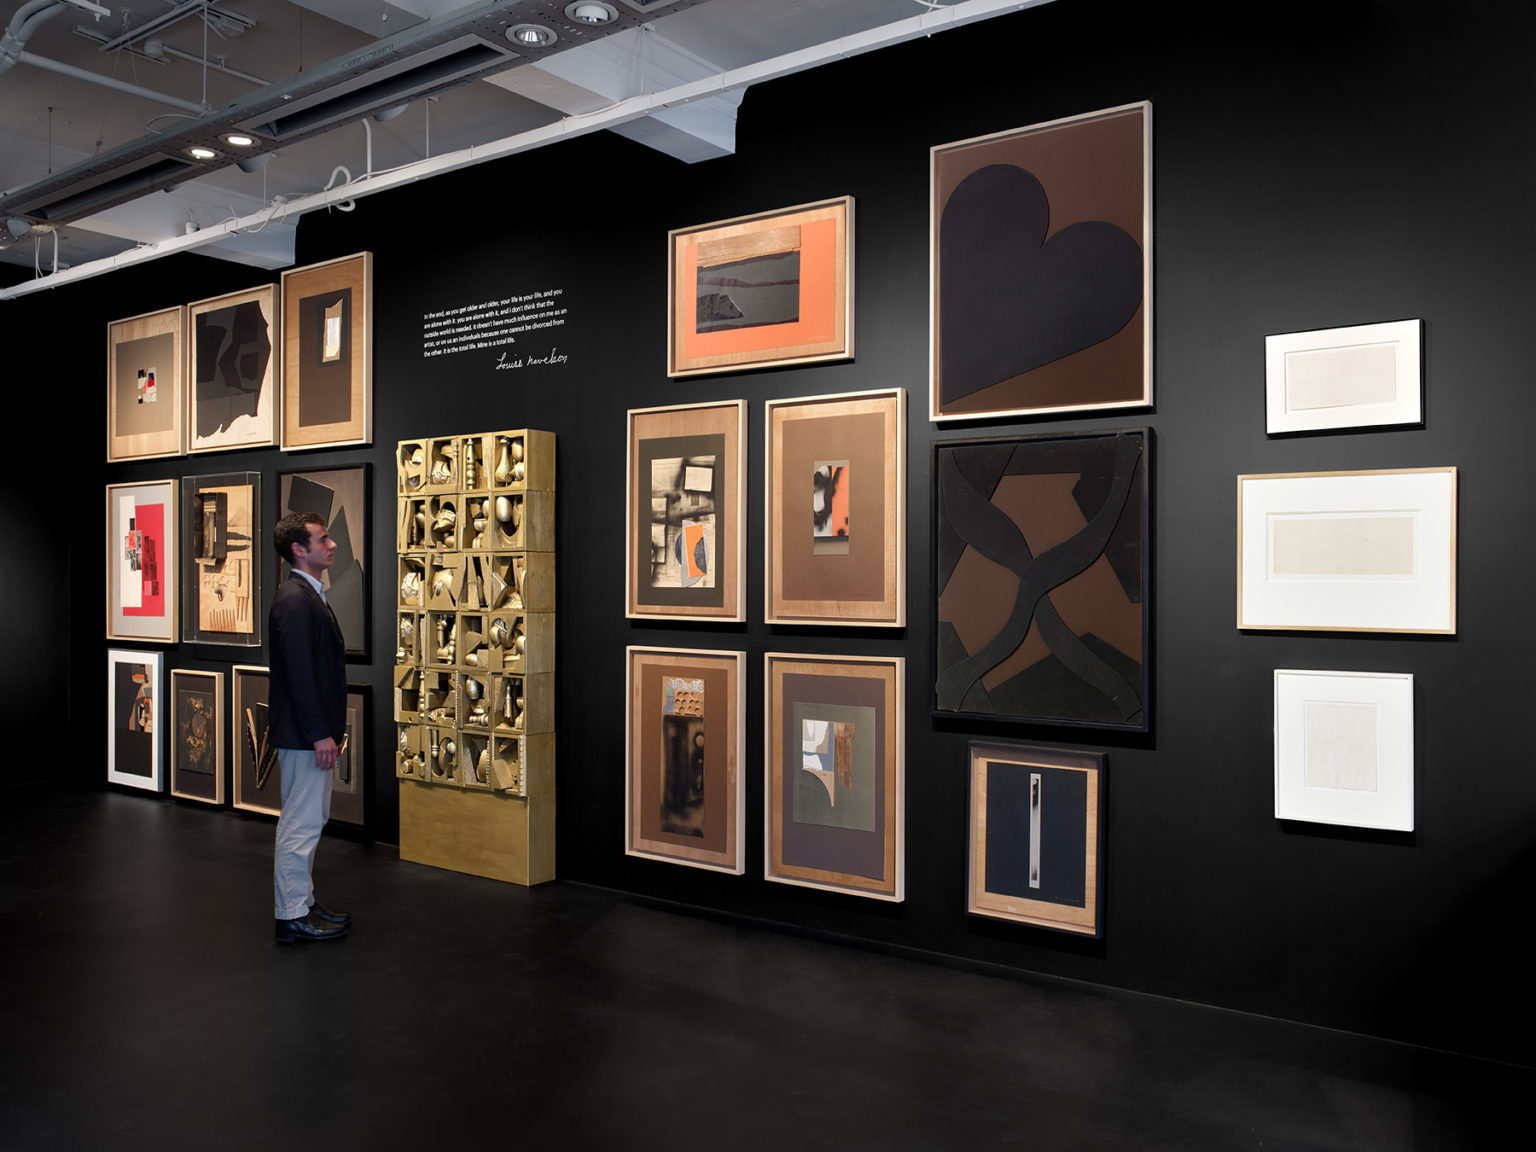 In a gallery with a black floor and walls, a light-skinned, brown-haired man wearing a blazer stands before a wall showcasing 22 of Louise Nevelson’s artworks. In the center of the wall stands s sculpture that resembles a bookshelf of knickknacks. A quote by Nevelson is written on the wall space above the bookshelf. Hanging on the walls flanking the bookshelf are several abstract collages and works on paper.